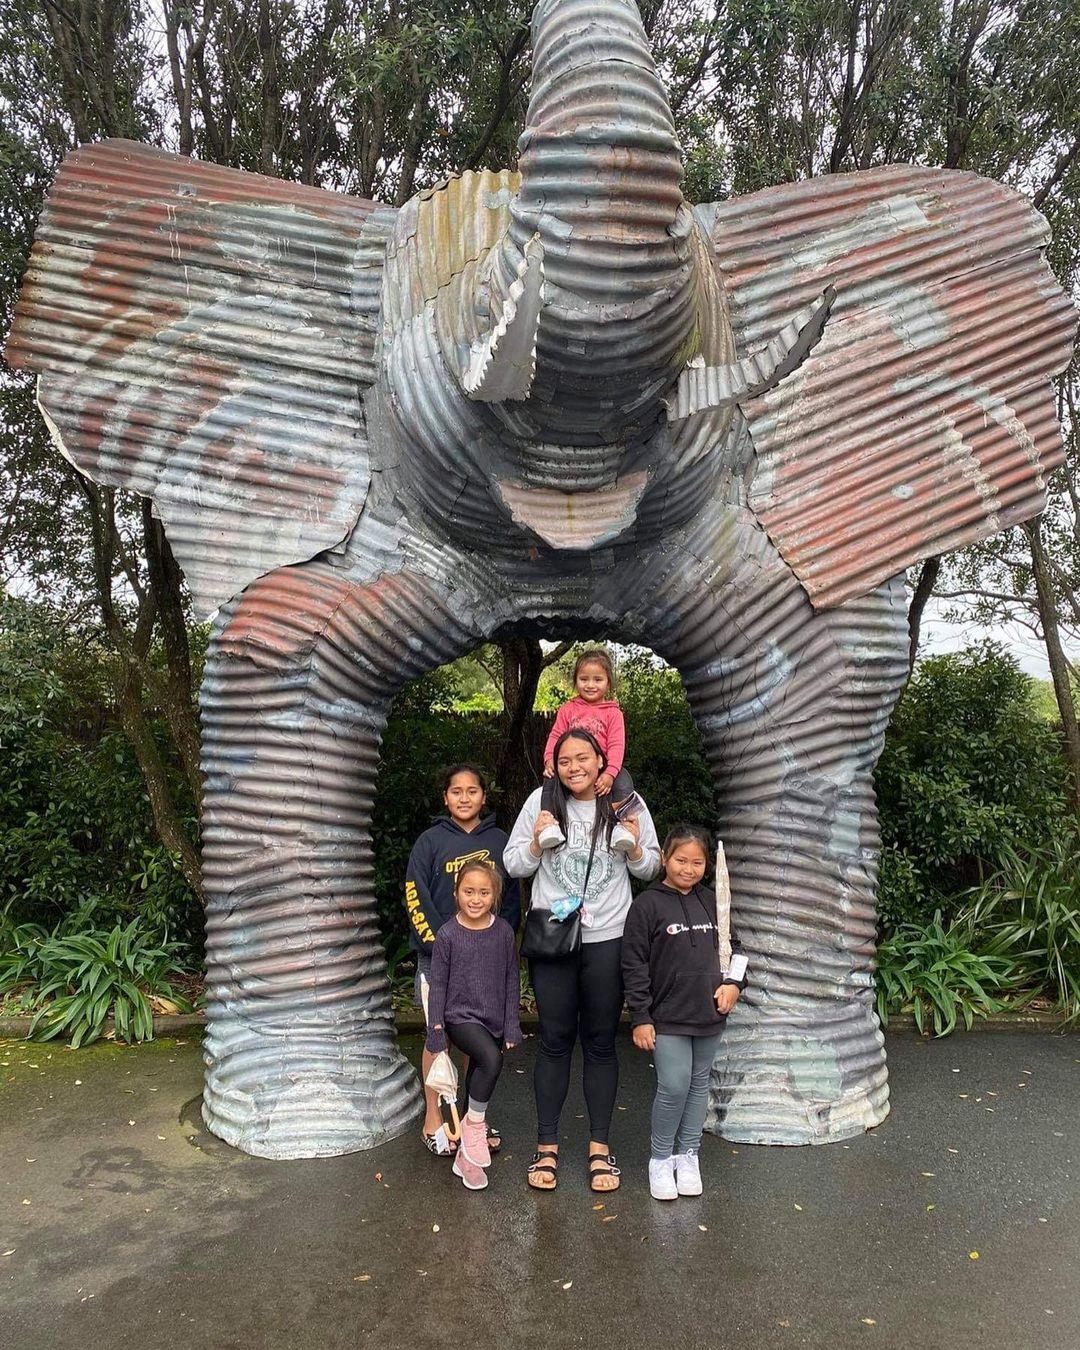 class="content__text"
 Love spending time with my girls. Day out at the zoo and no don’t get smart that I was visiting myself at the zoo🤦🏾😂 #DaddysGirls #OUA 
 